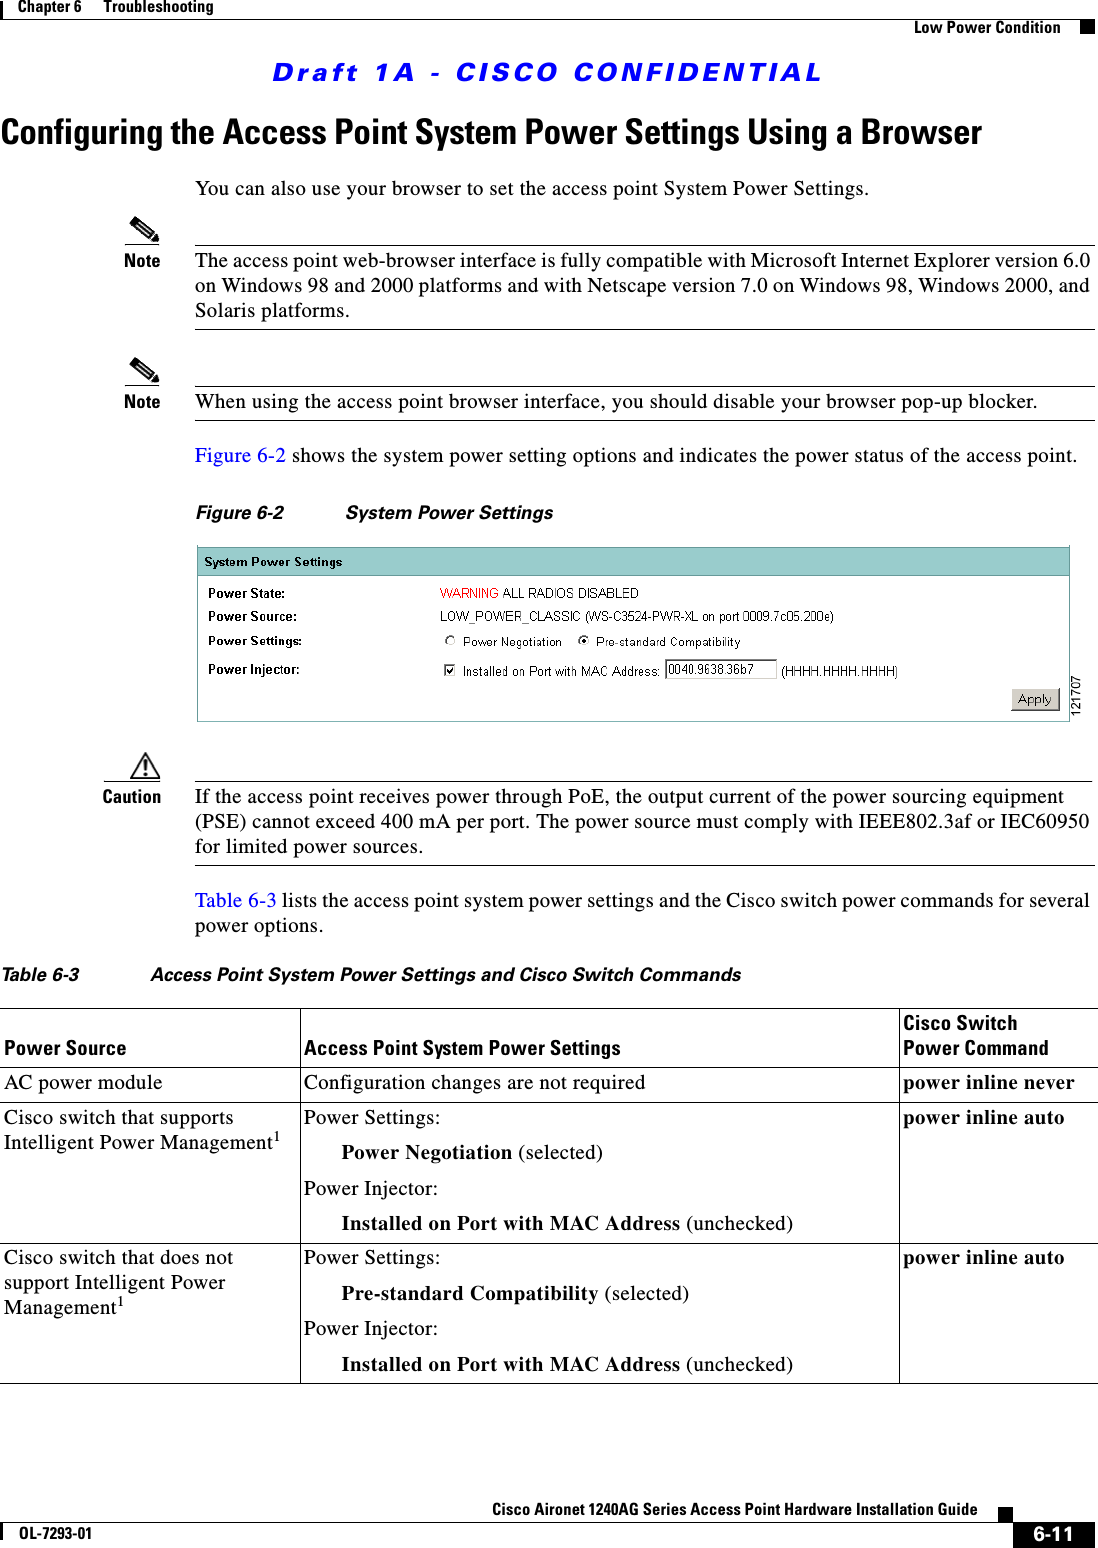 Draft 1A - CISCO CONFIDENTIAL6-11Cisco Aironet 1240AG Series Access Point Hardware Installation GuideOL-7293-01Chapter 6      TroubleshootingLow Power ConditionConfiguring the Access Point System Power Settings Using a BrowserYou can also use your browser to set the access point System Power Settings. Note The access point web-browser interface is fully compatible with Microsoft Internet Explorer version 6.0 on Windows 98 and 2000 platforms and with Netscape version 7.0 on Windows 98, Windows 2000, and Solaris platforms.Note When using the access point browser interface, you should disable your browser pop-up blocker.Figure 6-2 shows the system power setting options and indicates the power status of the access point.Figure 6-2 System Power SettingsCaution If the access point receives power through PoE, the output current of the power sourcing equipment (PSE) cannot exceed 400 mA per port. The power source must comply with IEEE802.3af or IEC60950 for limited power sources.Table 6-3 lists the access point system power settings and the Cisco switch power commands for several power options.Table 6-3 Access Point System Power Settings and Cisco Switch CommandsPower Source Access Point System Power SettingsCisco Switch Power CommandAC power module Configuration changes are not required power inline neverCisco switch that supports Intelligent Power Management1Power Settings:Power Negotiation (selected)Power Injector: Installed on Port with MAC Address (unchecked)power inline autoCisco switch that does not support Intelligent Power Management1Power Settings:Pre-standard Compatibility (selected)Power Injector:Installed on Port with MAC Address (unchecked)power inline auto